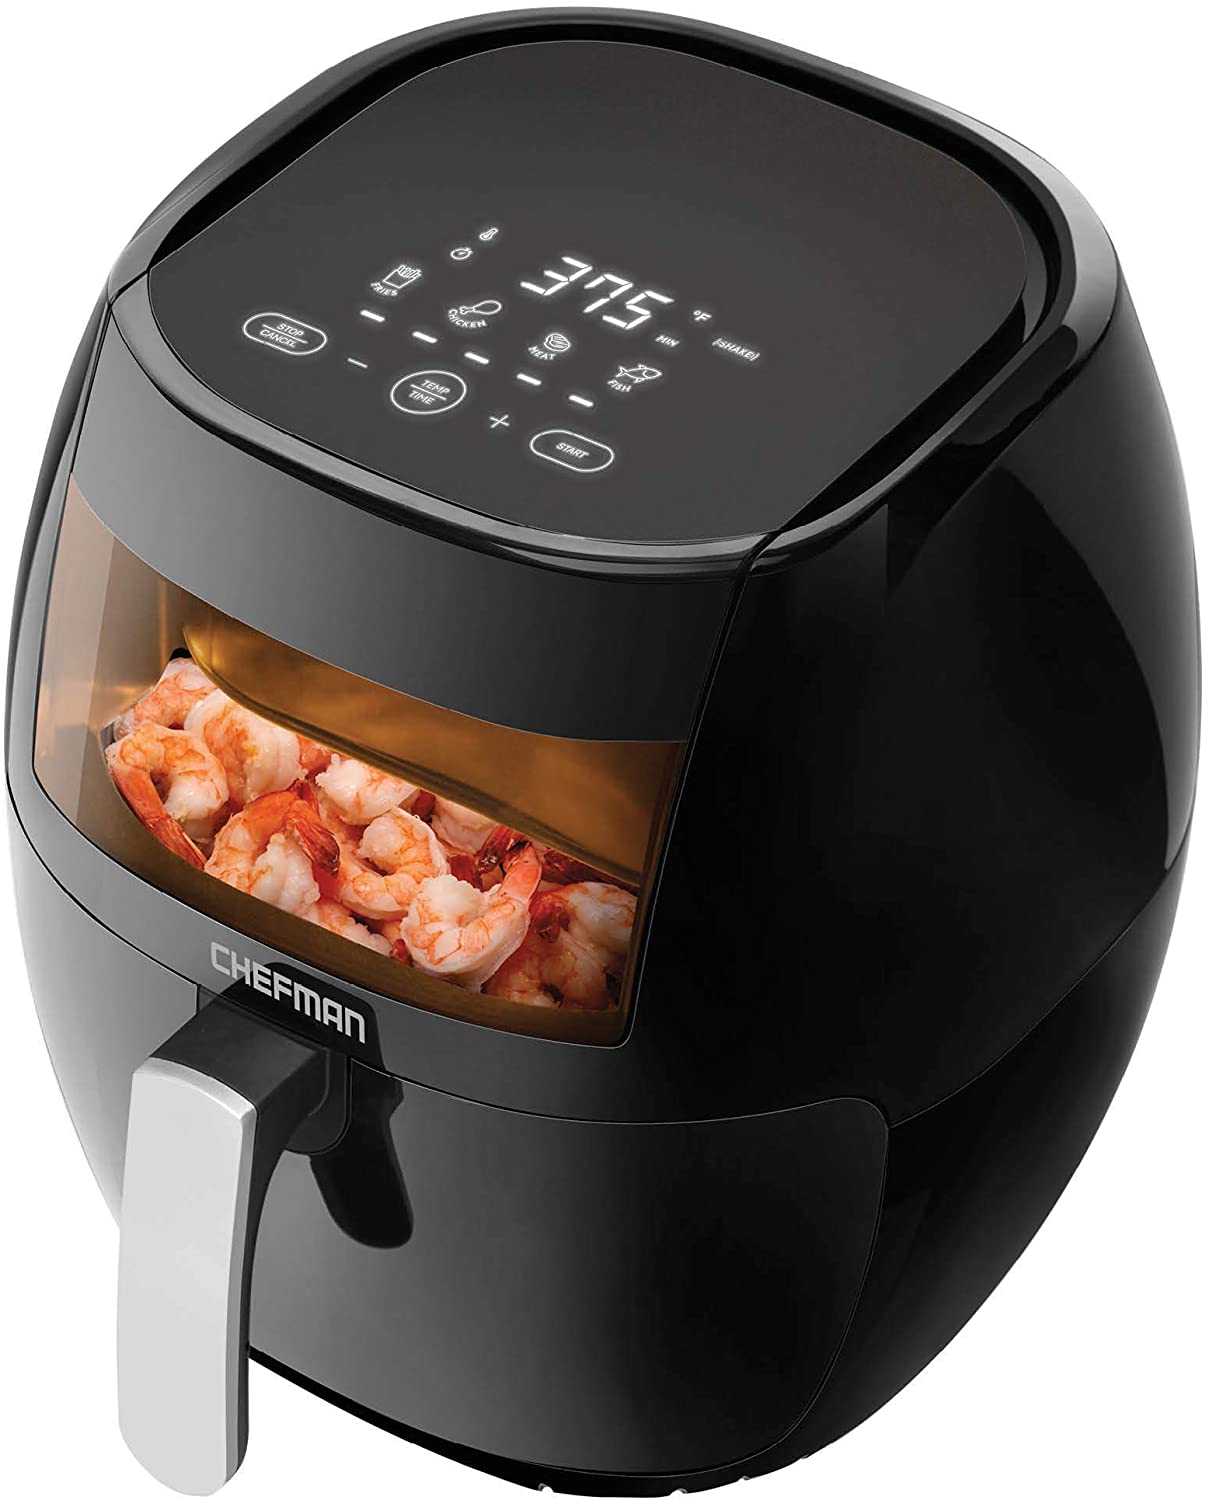 8-qt Chefman TurboFry Touch Air Fryer w/ Viewing Window $60 + free s/h at Amazon